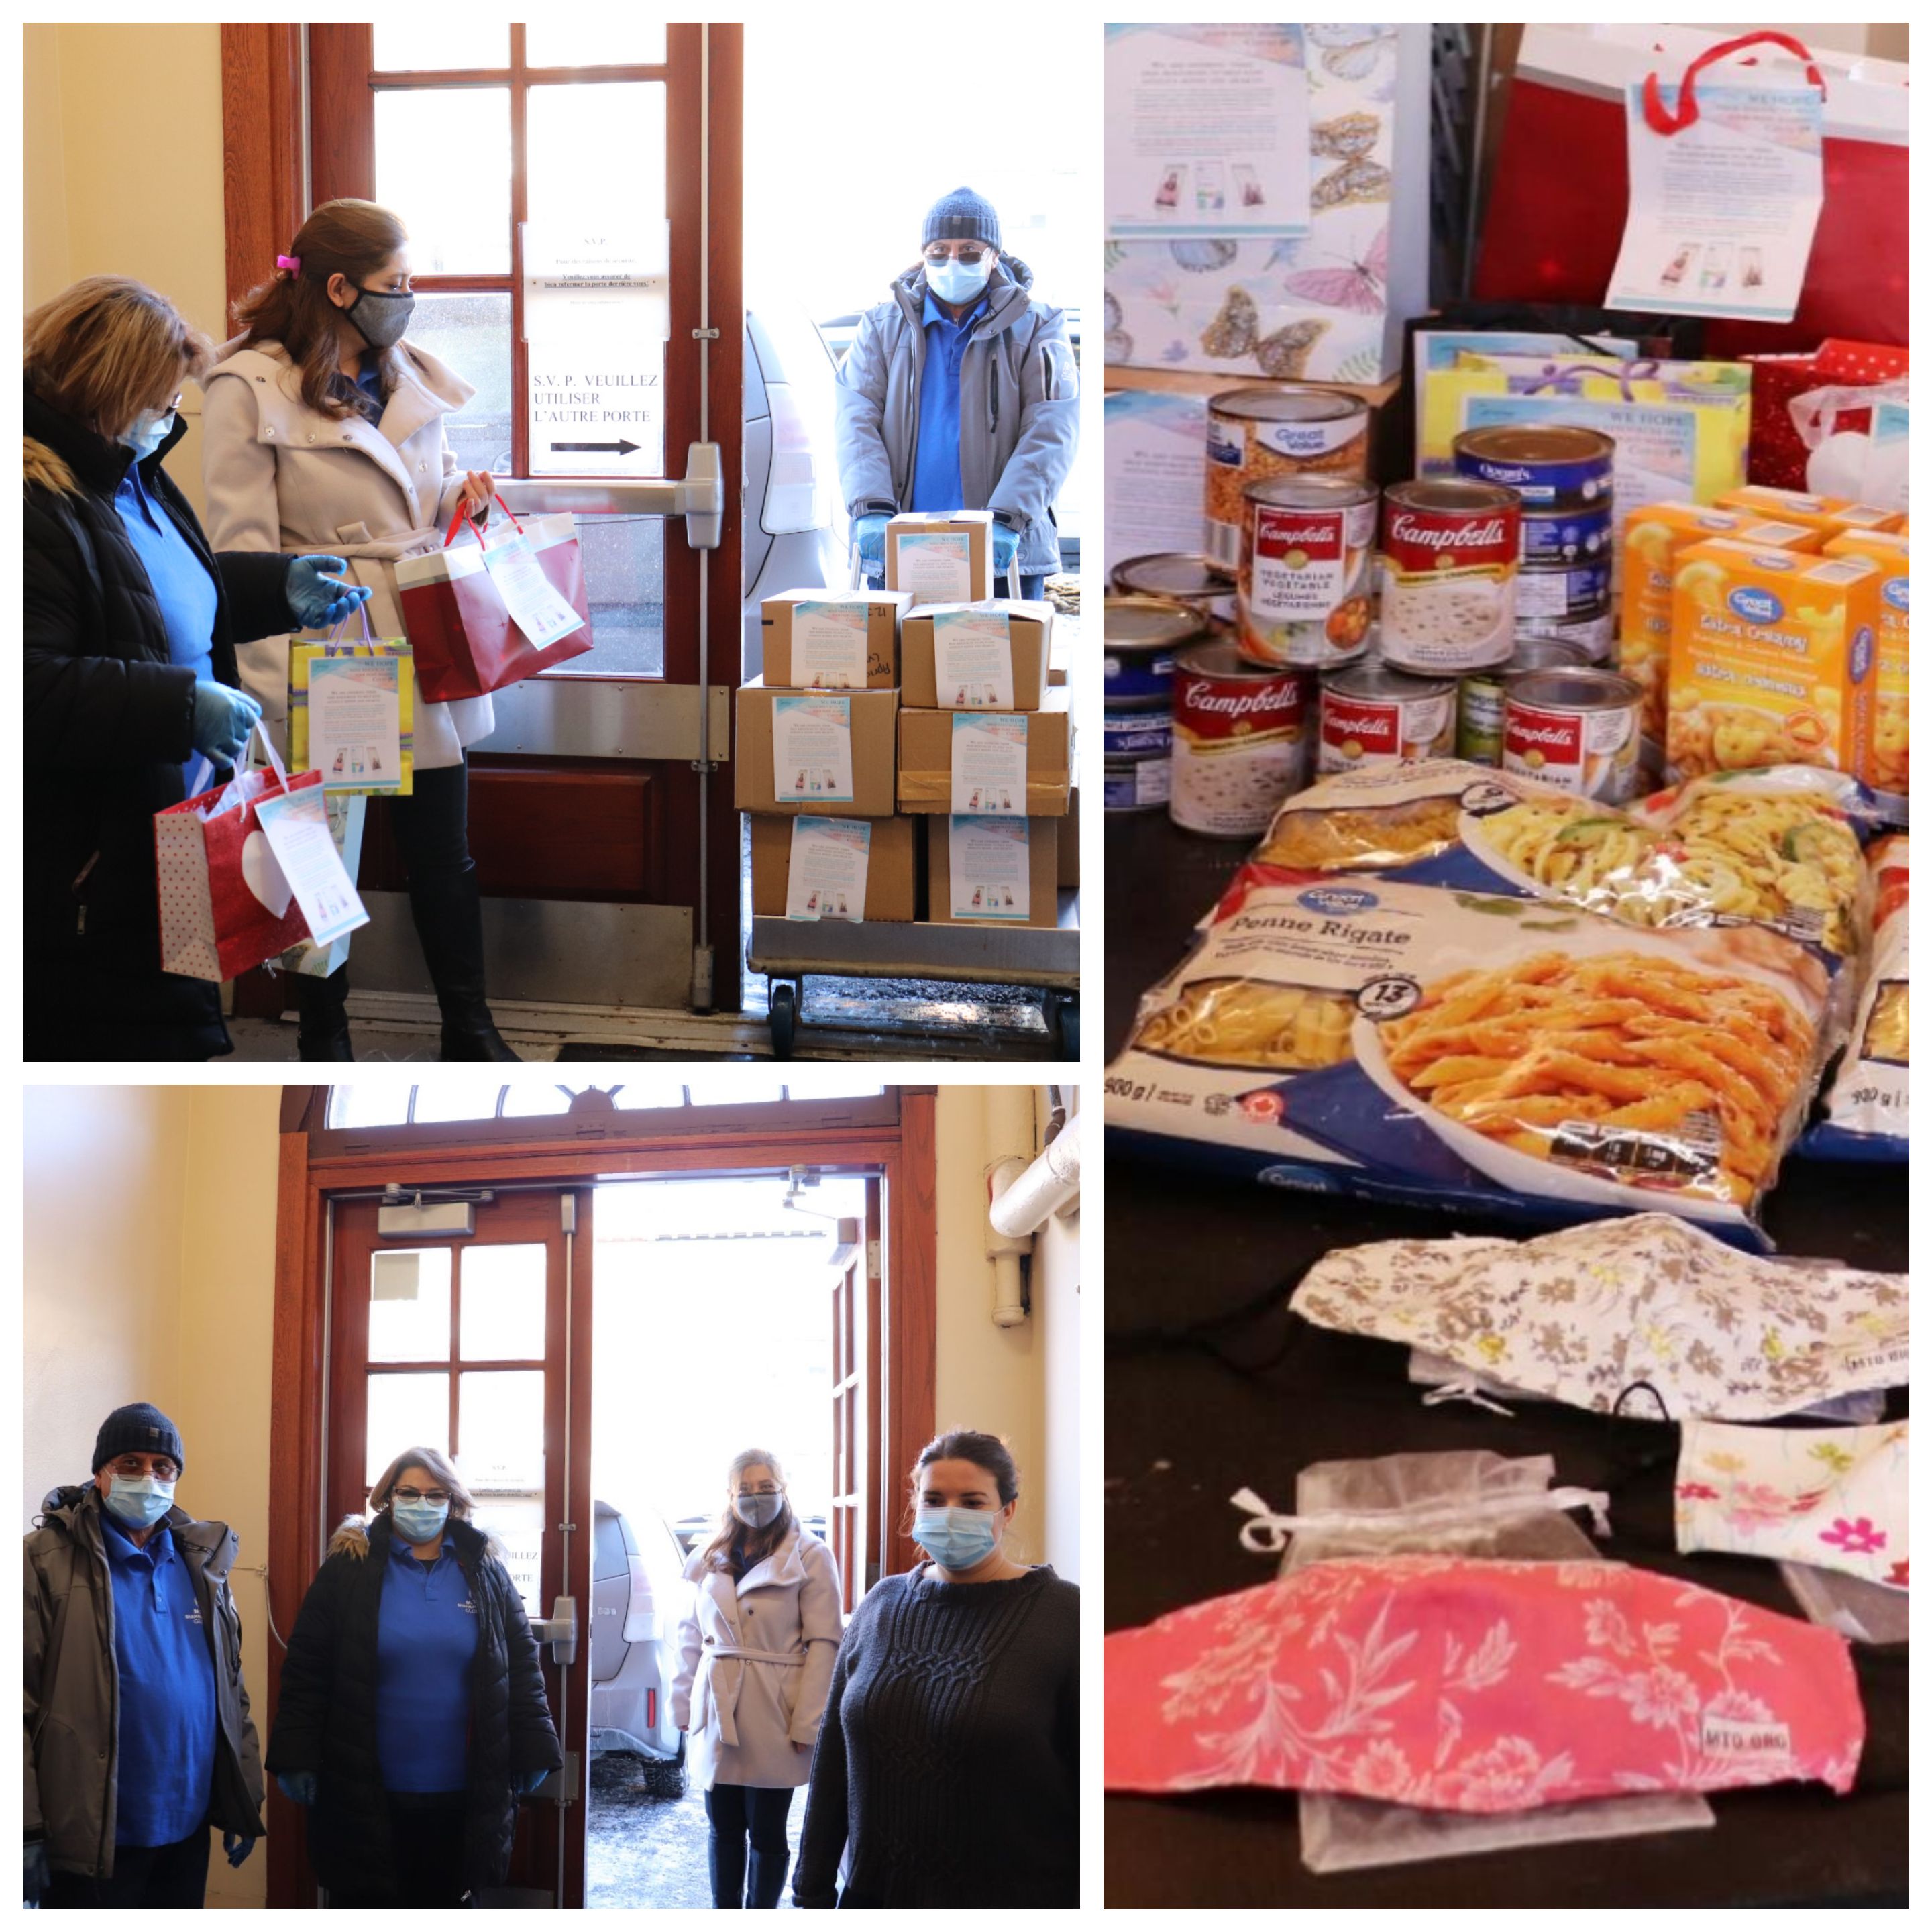 M.T.O. Montreal Hosts Food Drive for Shelter in Celebration of Professor Sadegh Angha's Birthday